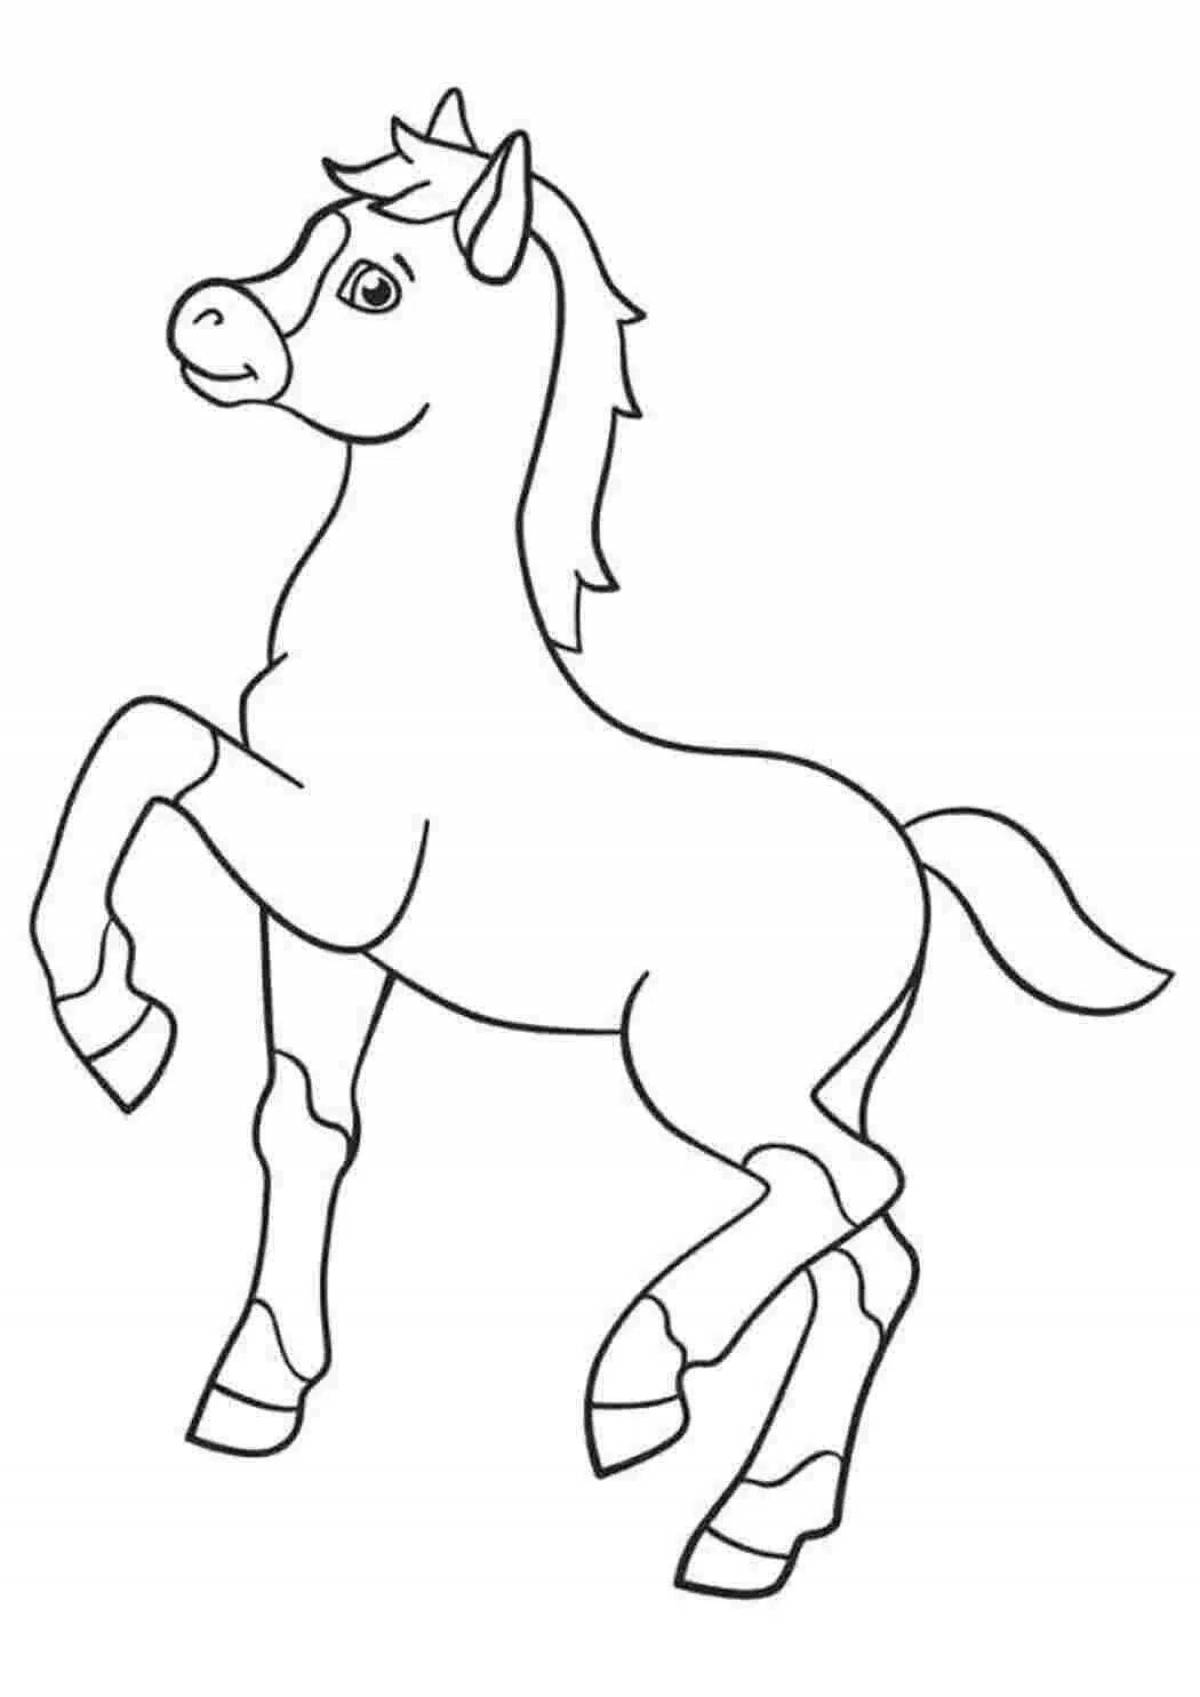 Exquisite foal coloring book for kids